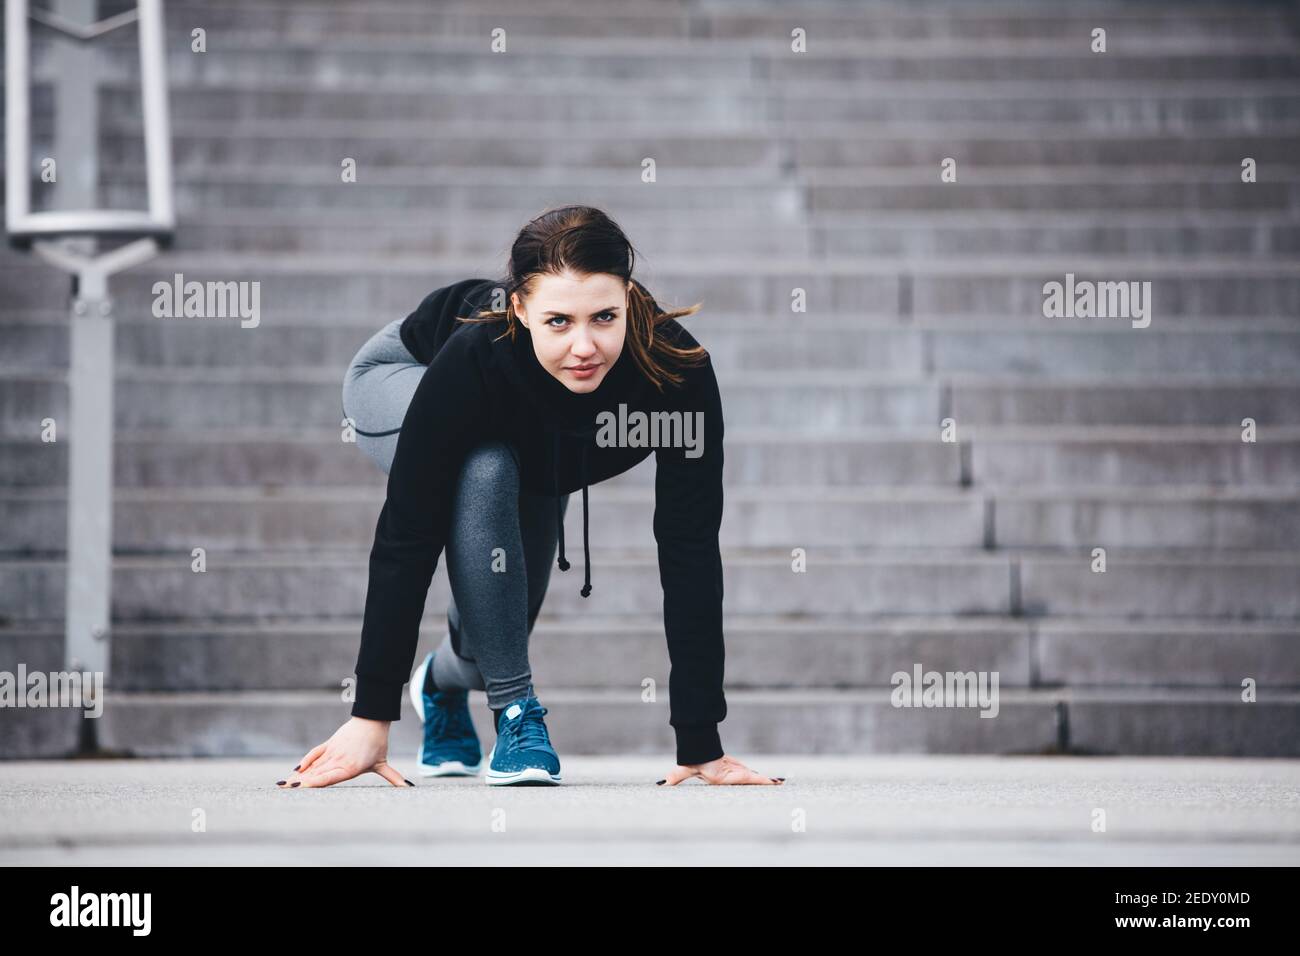 Woman in sports clothes ready to run. Athlete. Fit lifestyle. Professional sportswoman. Stock Photo